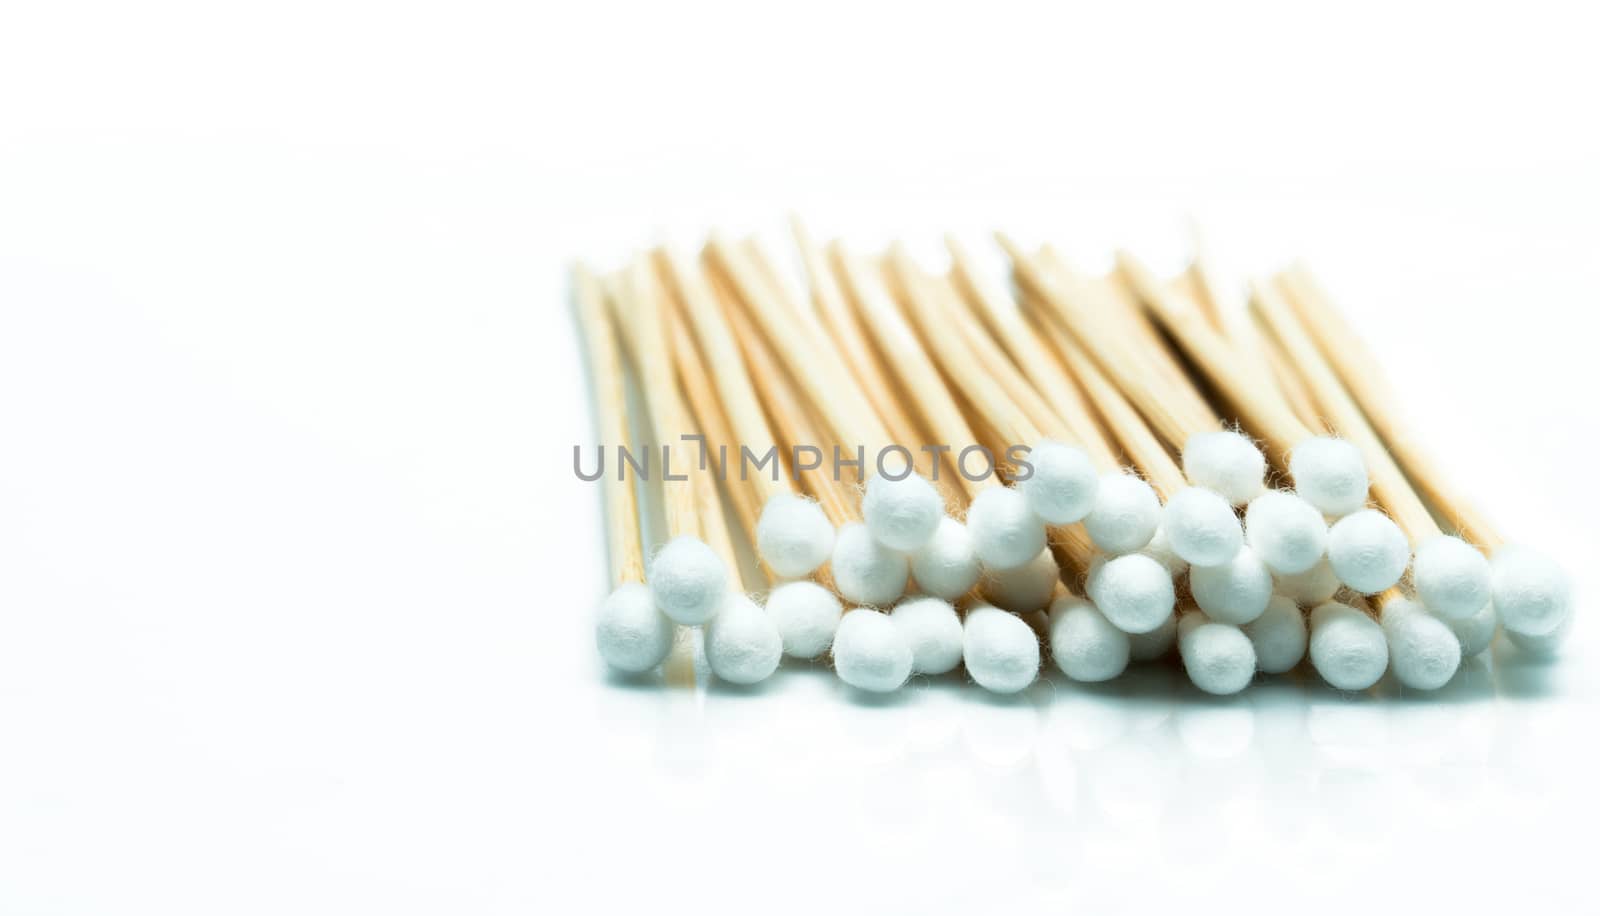 Cotton sticks isolated on white background with copy space for text. Wound care supply. Medical equipment.